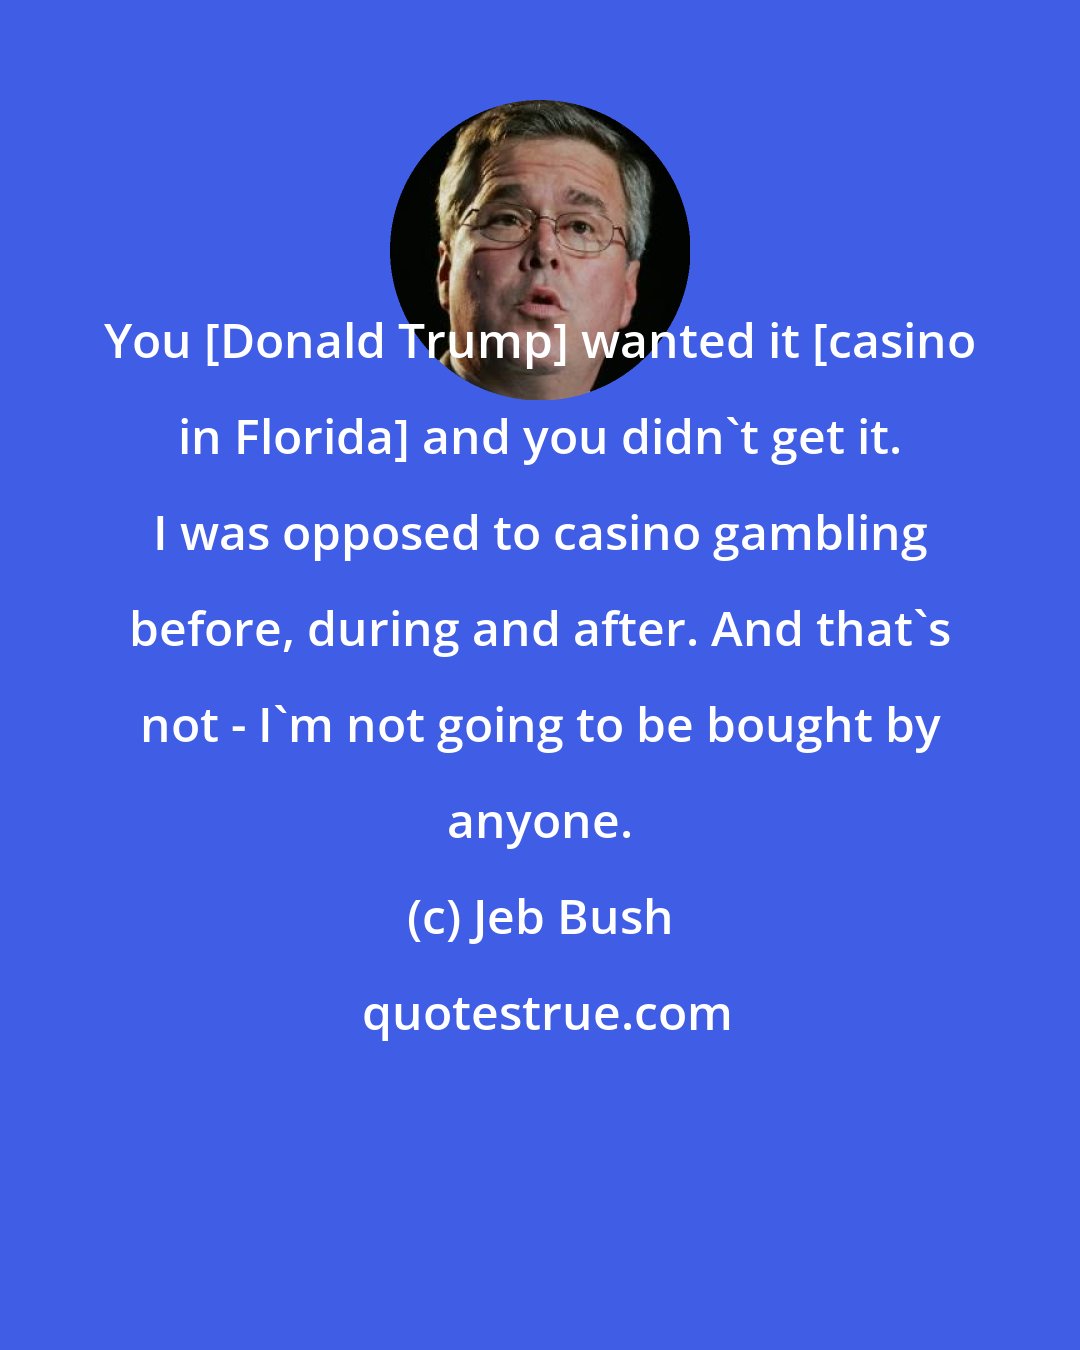 Jeb Bush: You [Donald Trump] wanted it [casino in Florida] and you didn`t get it. I was opposed to casino gambling before, during and after. And that`s not - I`m not going to be bought by anyone.